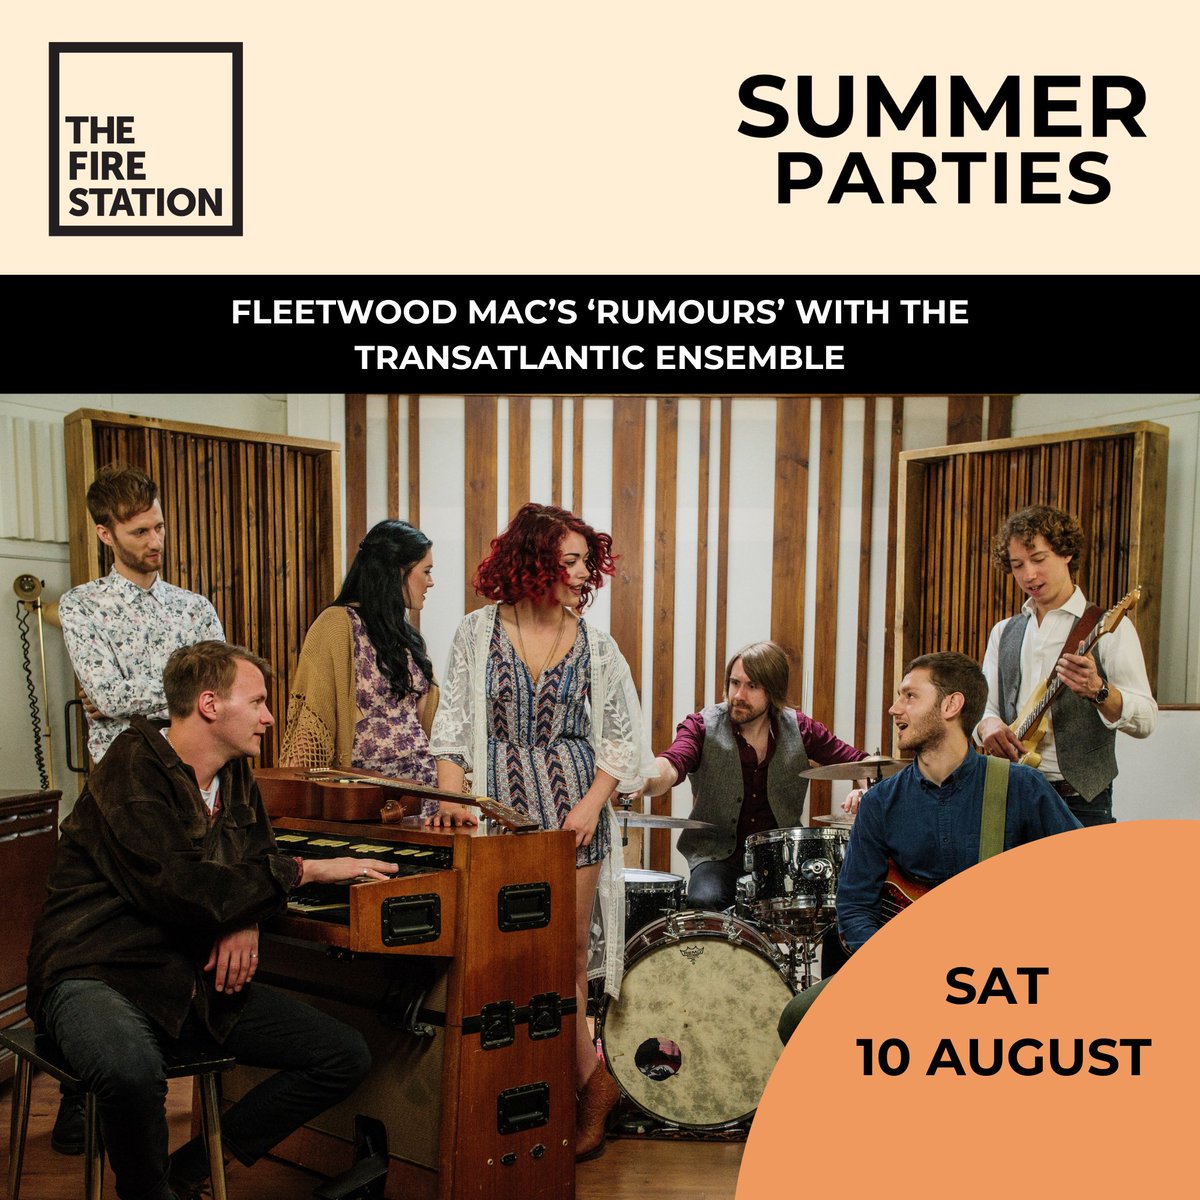 🔥 We’re thrilled to welcome the Transatlantic Ensemble to The Fire Station to lovingly recreate Fleetwood Mac’s timeless album ‘Rumous’, over 40 years since its release. Fleetwood Mac’s ‘Rumours’ with the Transatlantic Ensemble - Sat 10 Aug - 👉 tinyurl.com/4ju3y4ps